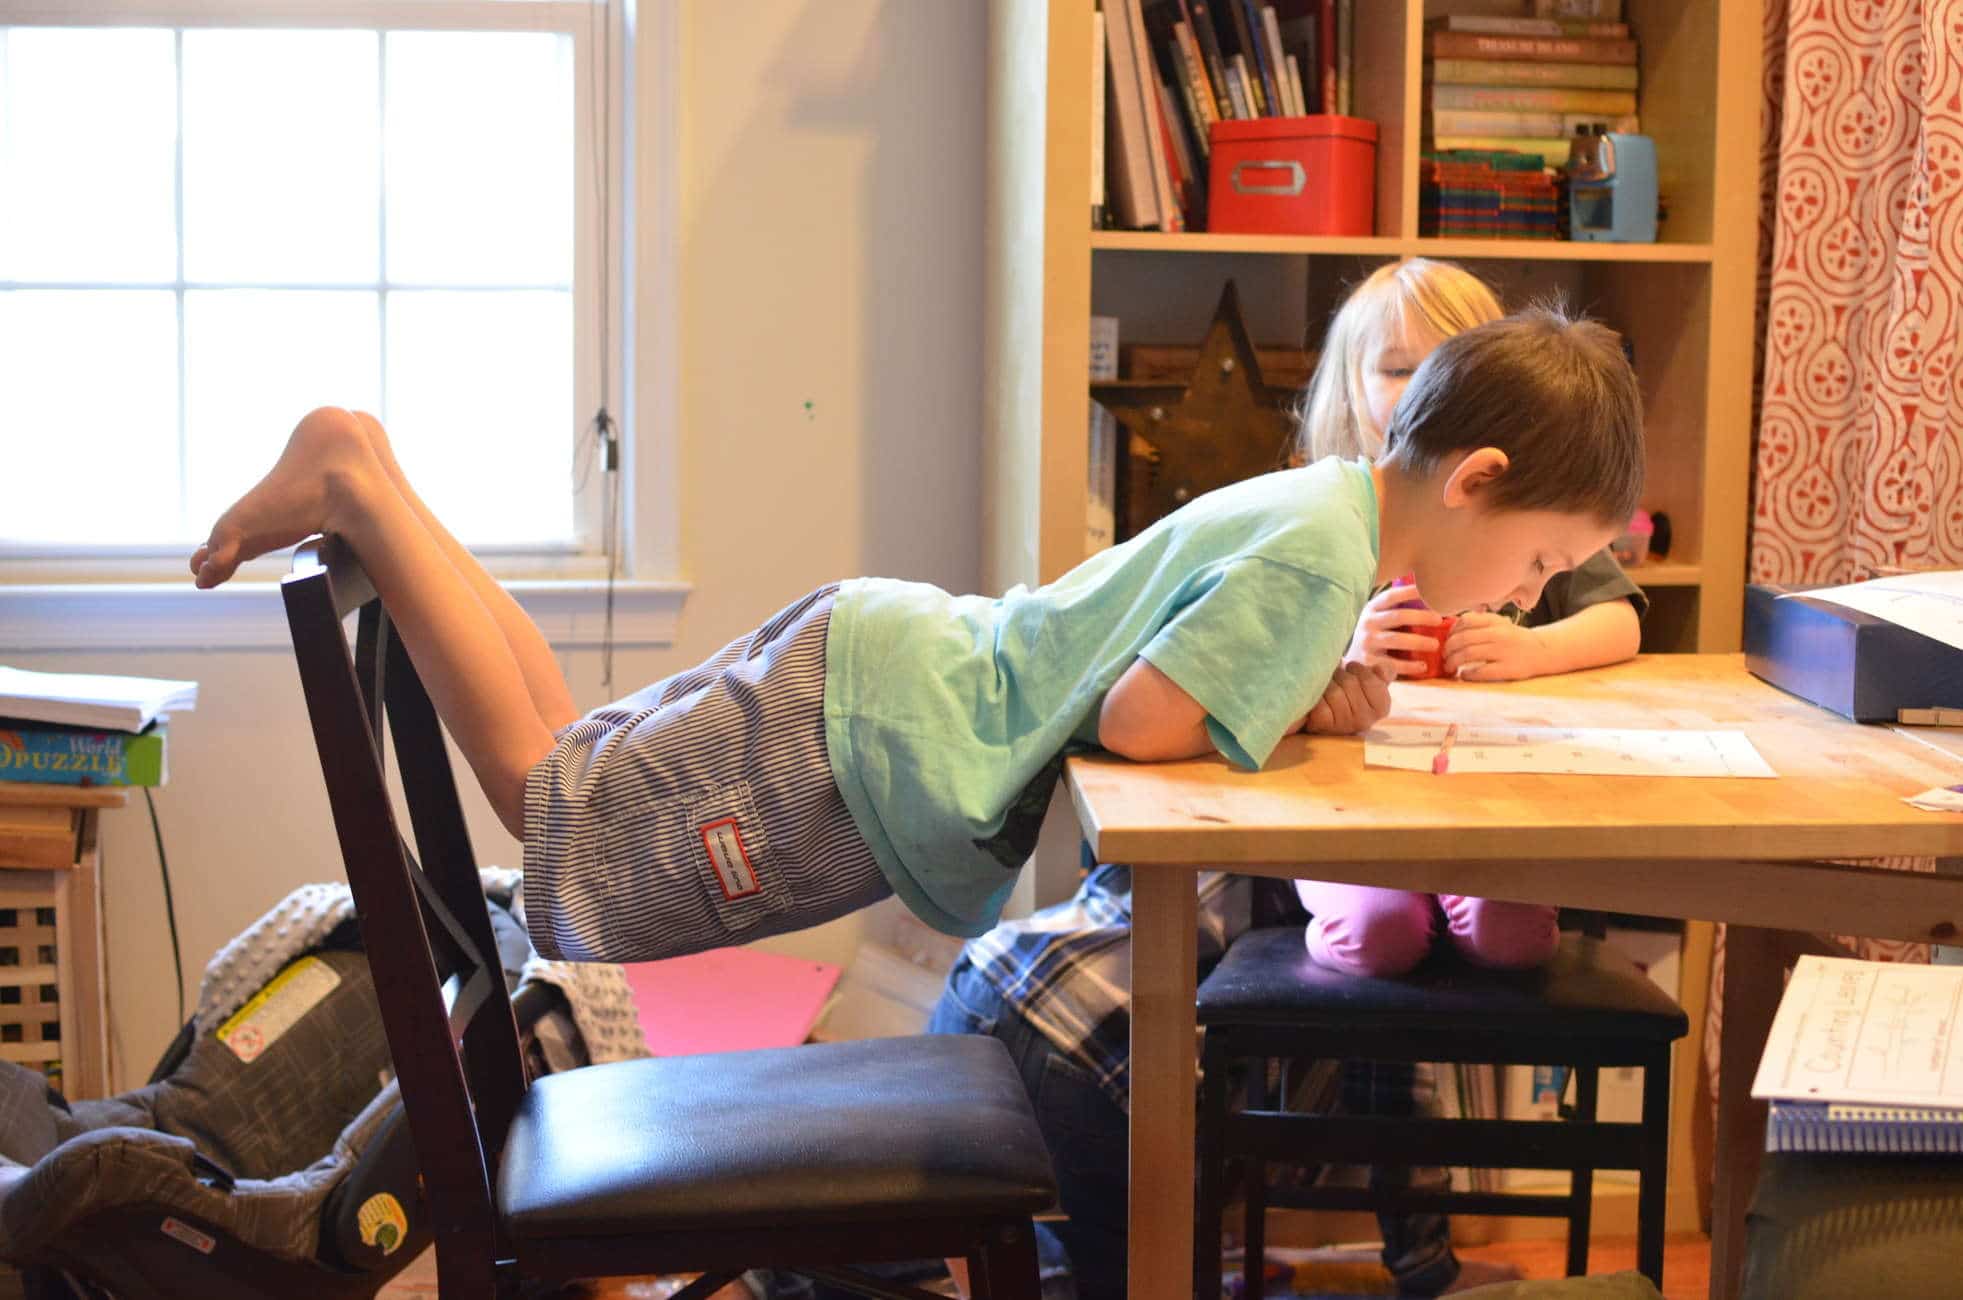 Our January Re-Cap: Real Life Homeschooling